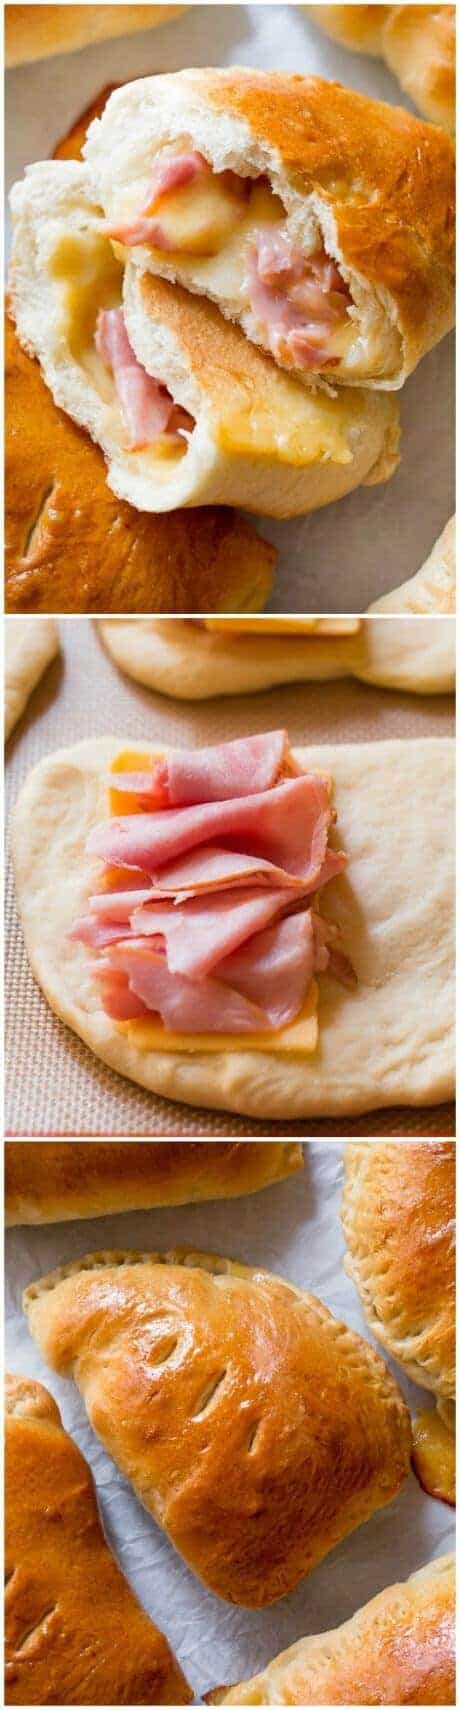 Homemade Ham and Cheese Pockets by Sally's Baking Addiction